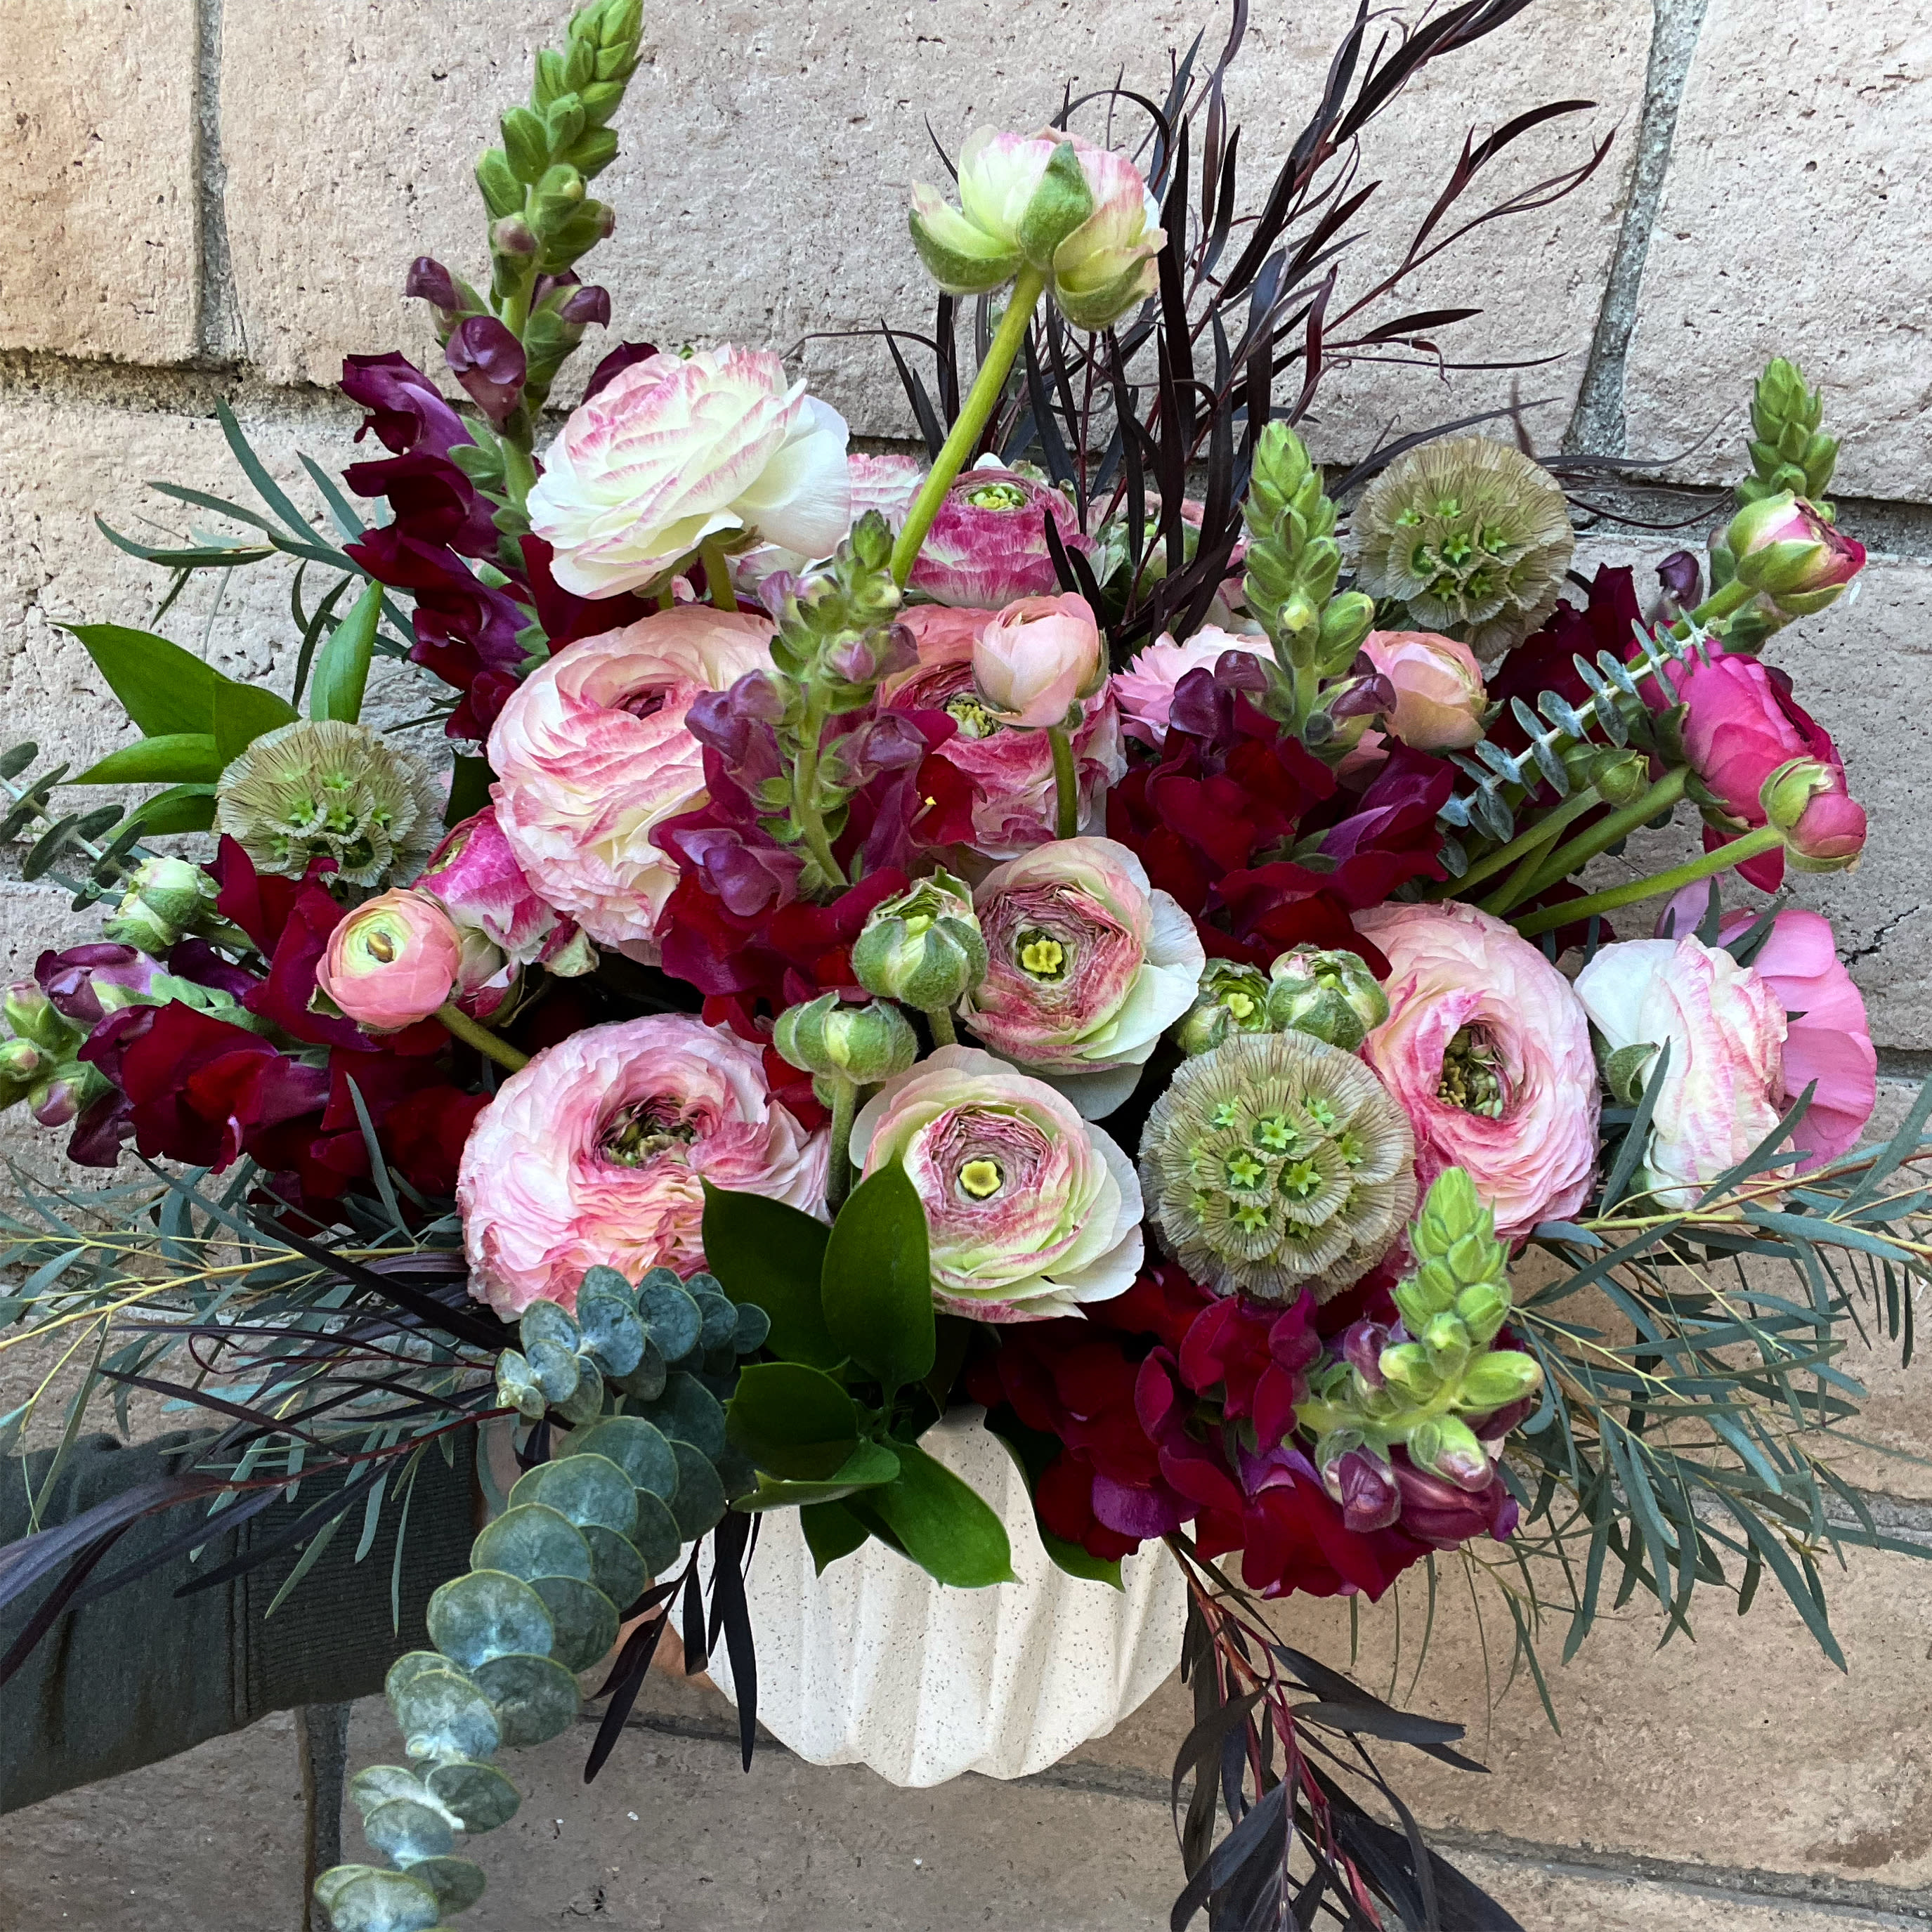 Head Over Heels - A dreamy mix of burgundy Snpadragons and mixed white and pink Ranunculus with accents of black feather Eucalyptus and Scabies pods. An exceptional arrangement for the romantic who had a little edge. 